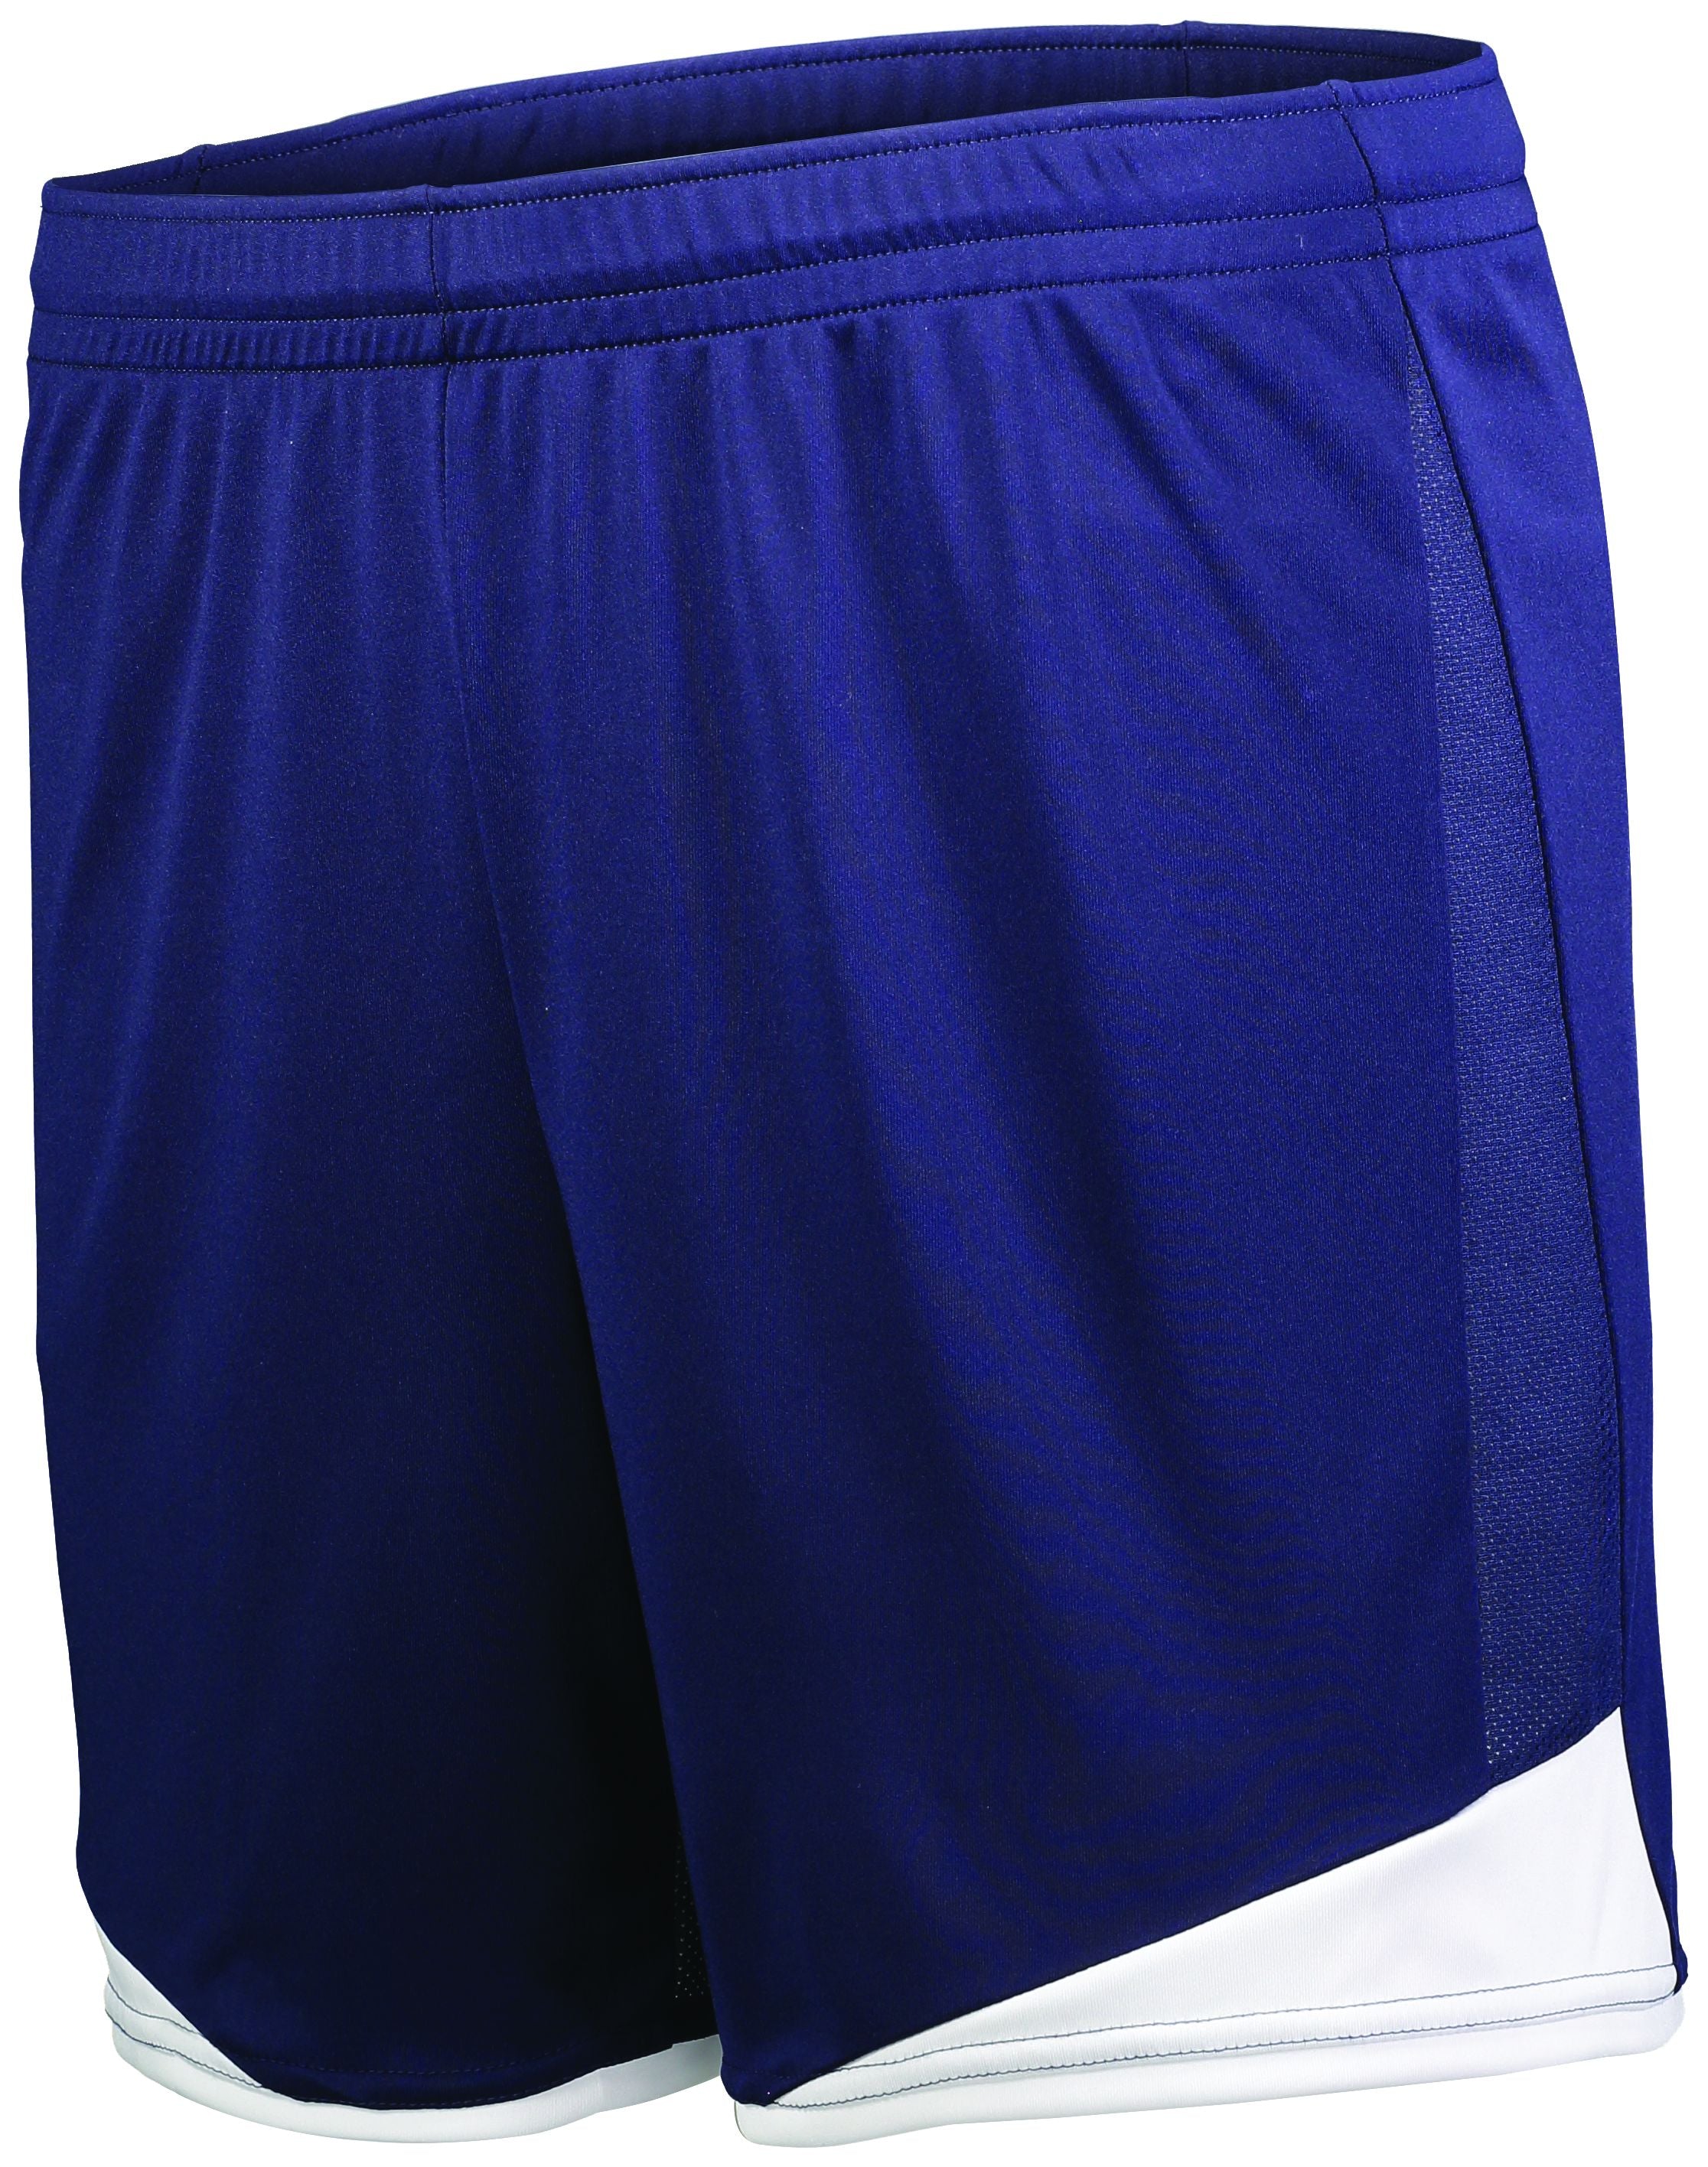 High 5 Ladies Stamford Soccer Shorts in Navy/White  -Part of the Ladies, Ladies-Shorts, High5-Products, Soccer, All-Sports-1 product lines at KanaleyCreations.com